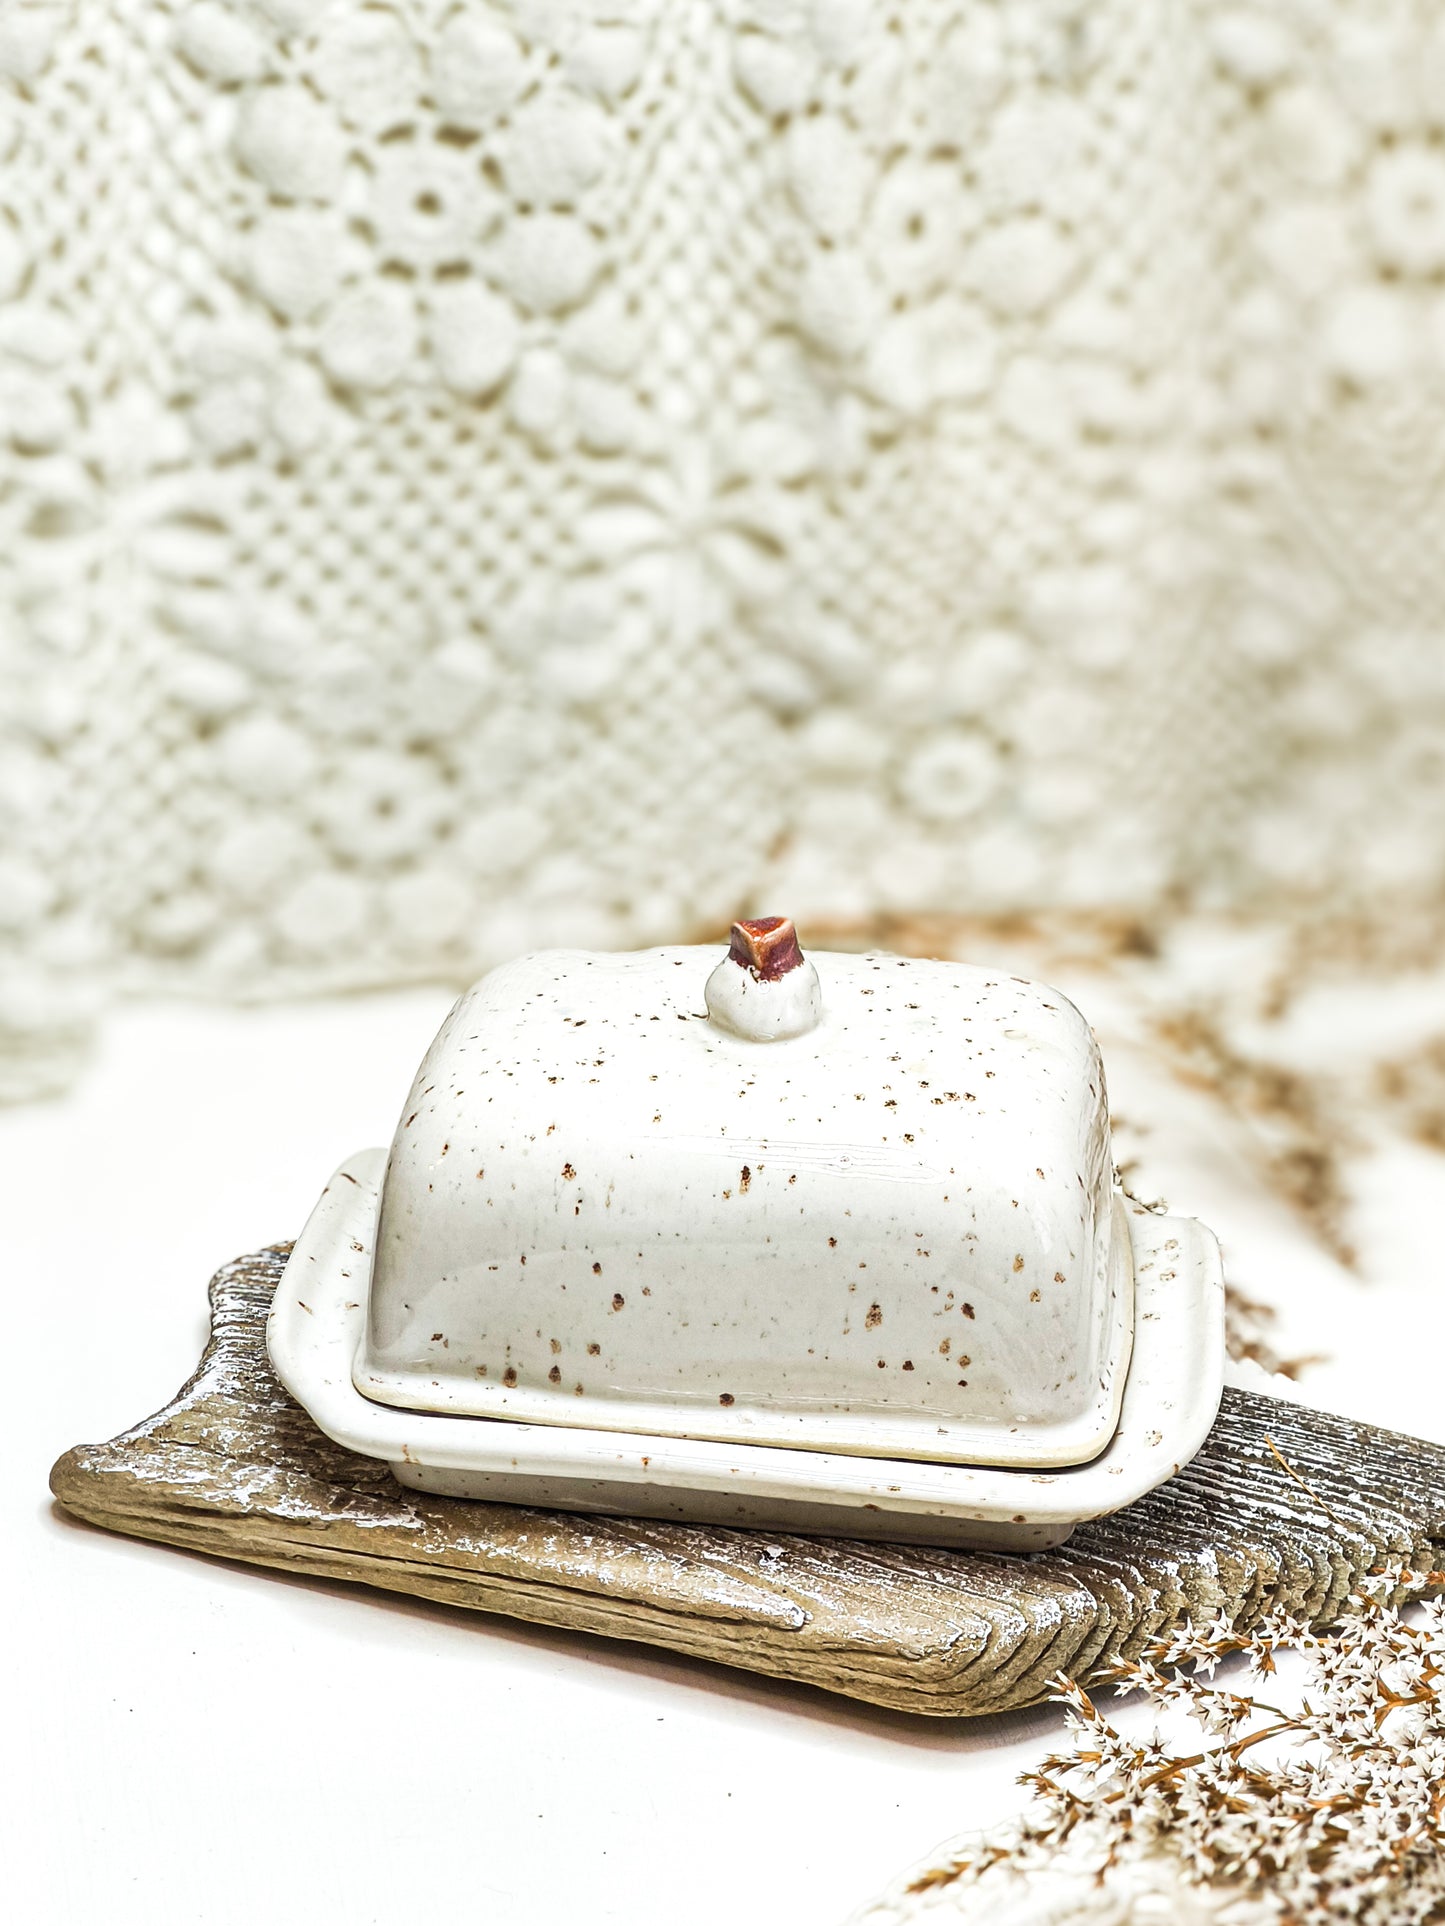 Ceramic butter dish with a heart motif